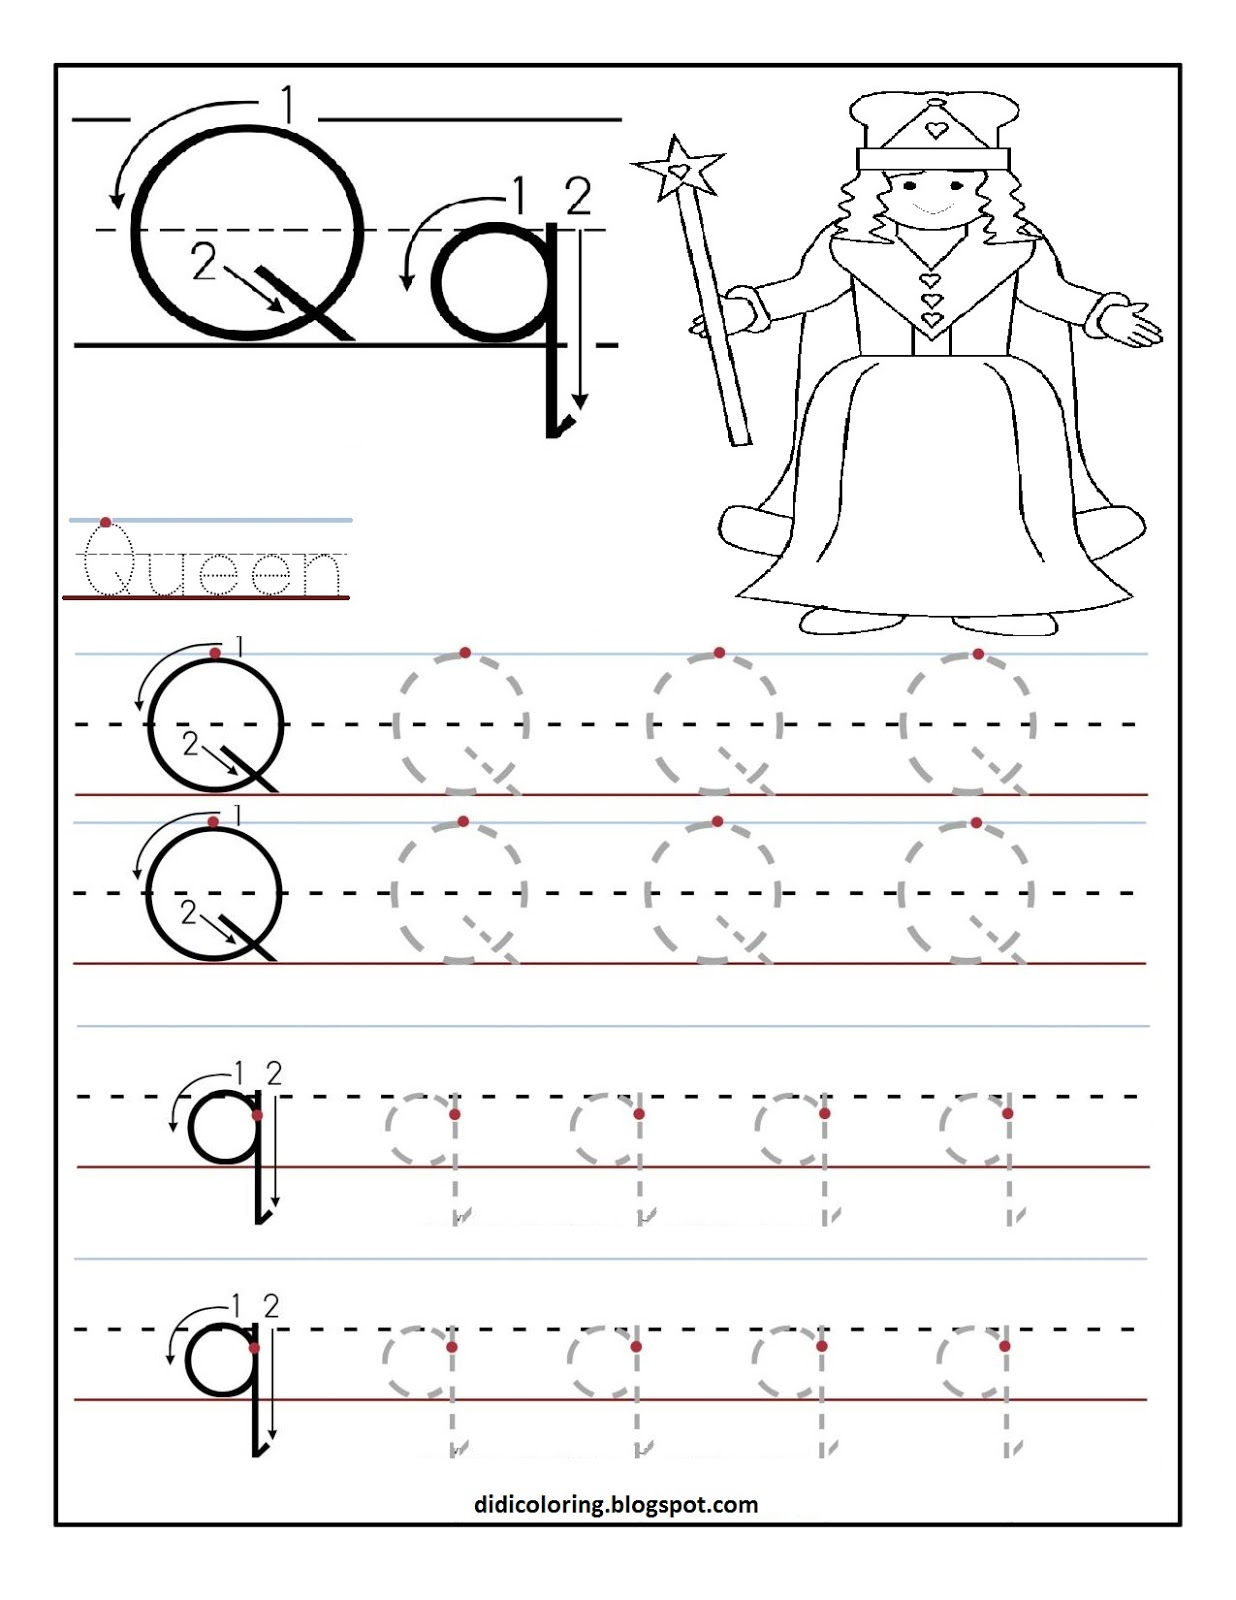 Didi coloring Page: Free printable worksheet letter Q for your